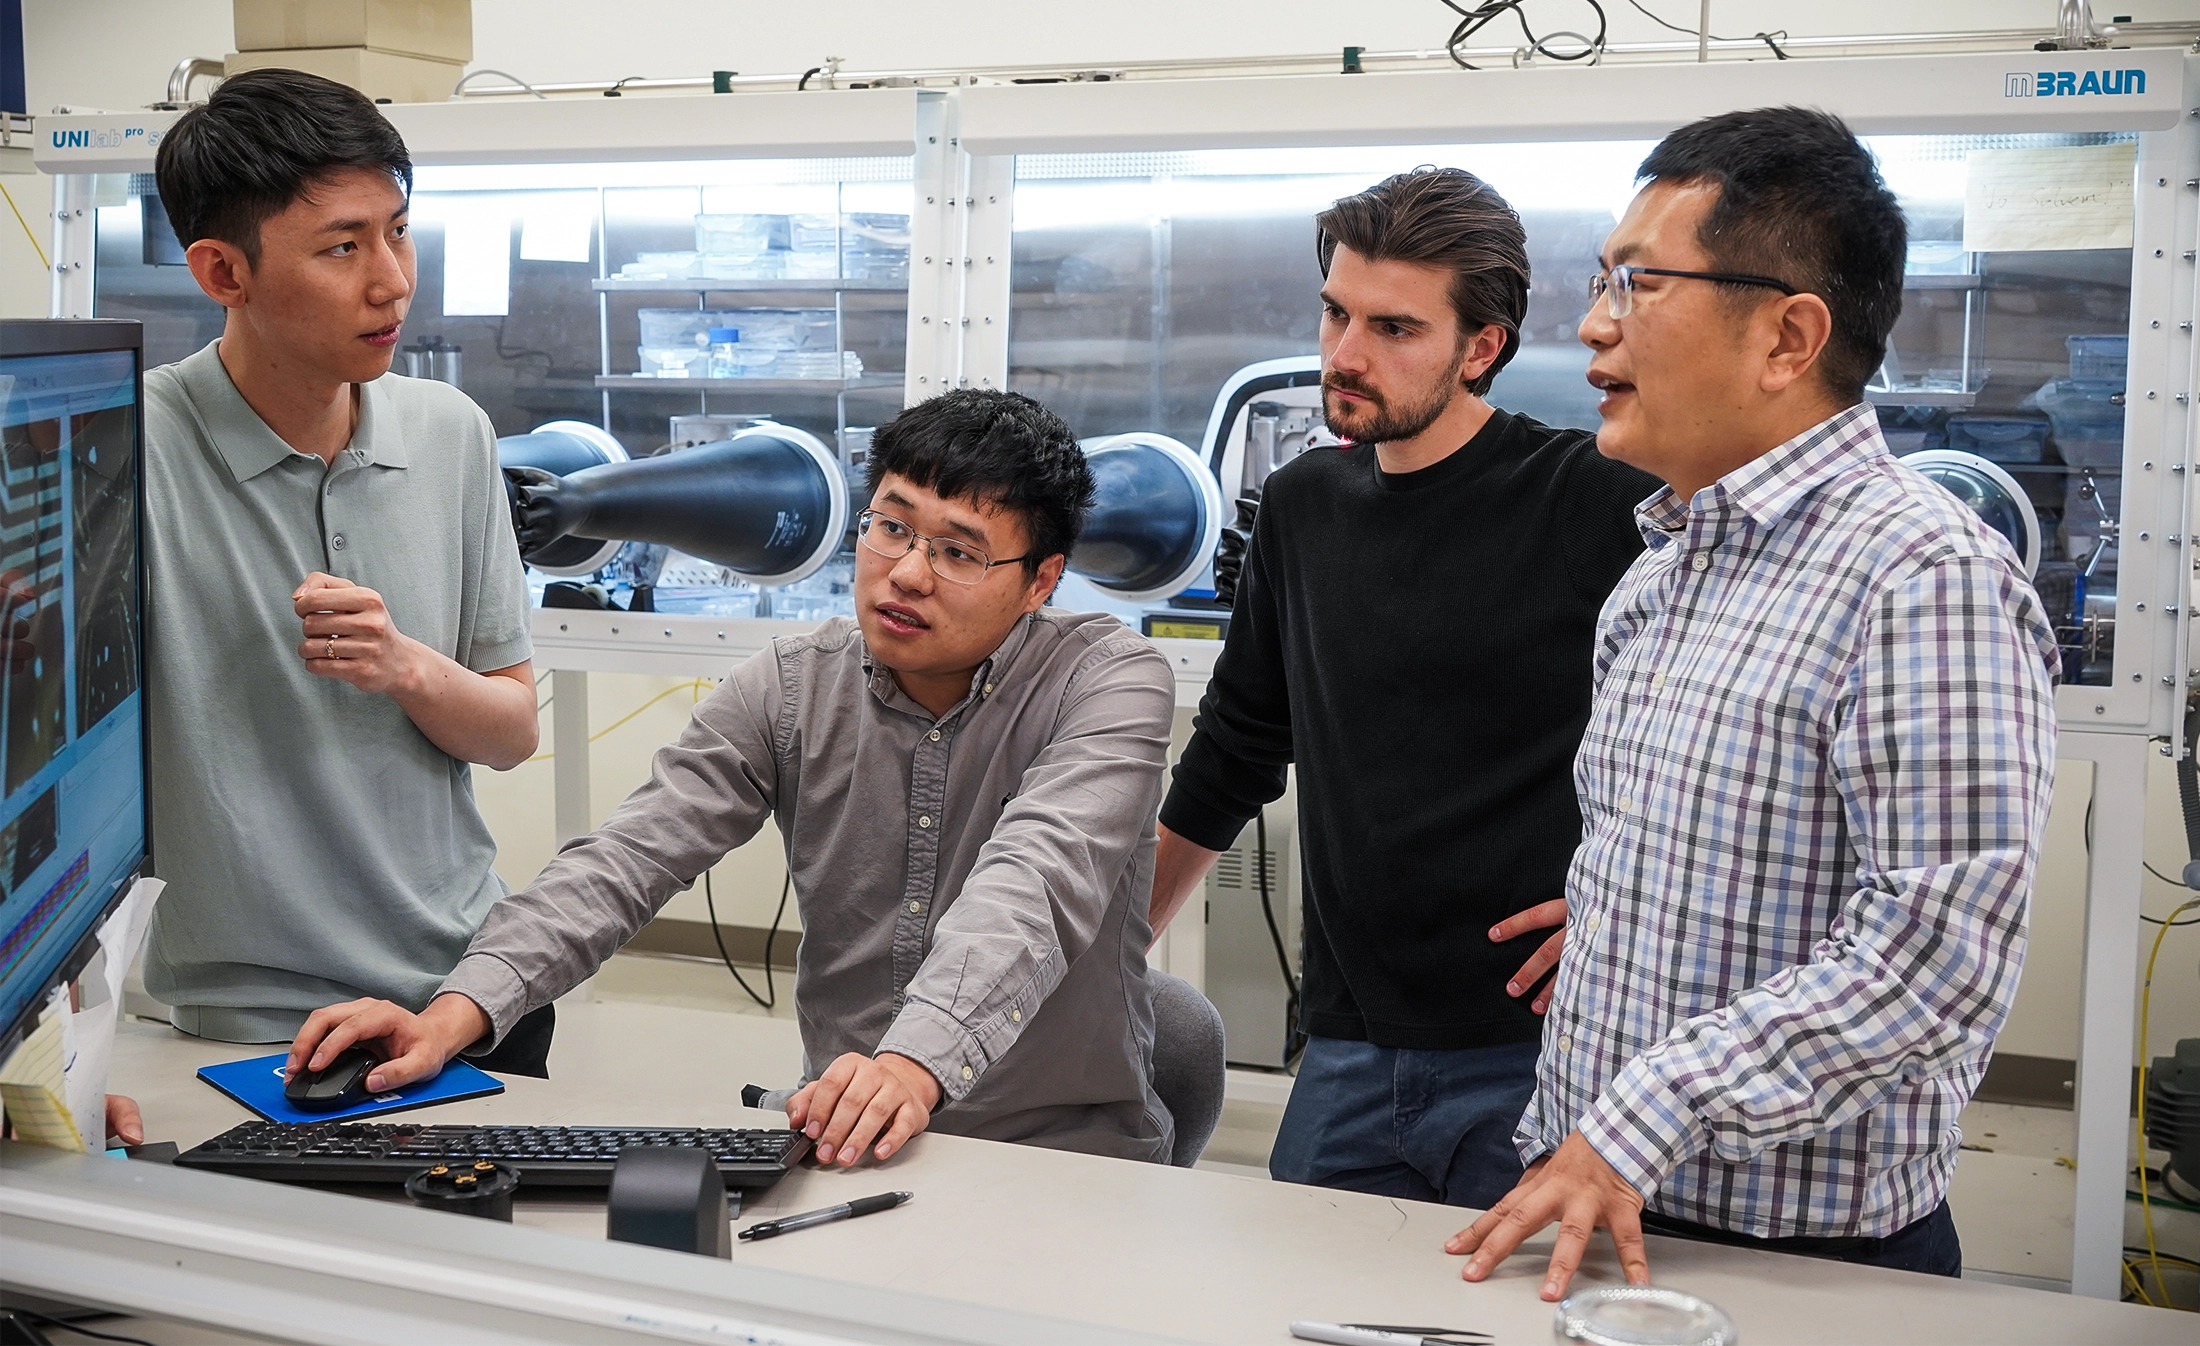 Xiaodong Xu (right) speaking to three other students in a lab.